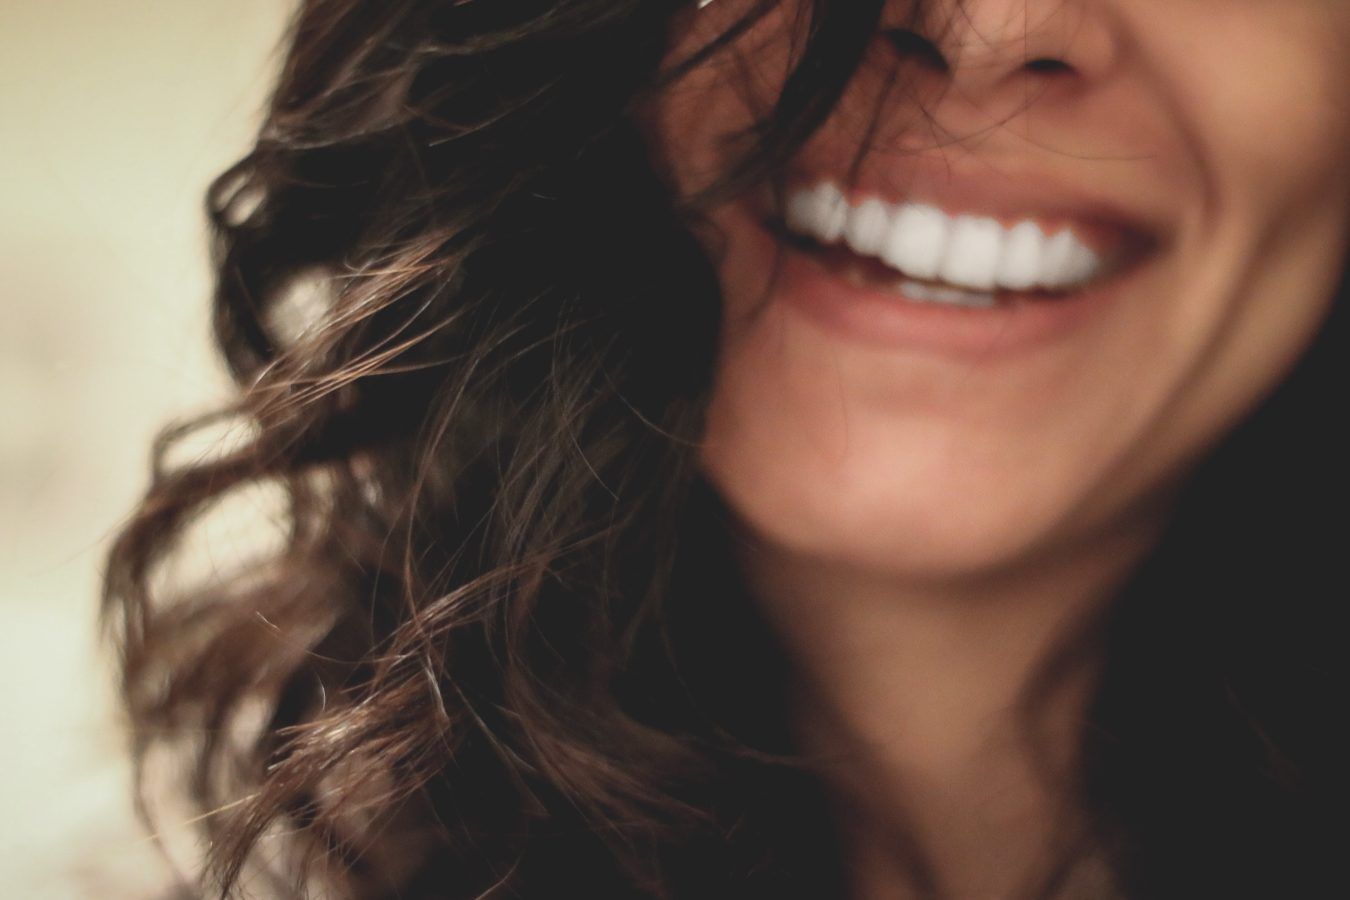 Dental veneers have gone viral, but are they really safe?